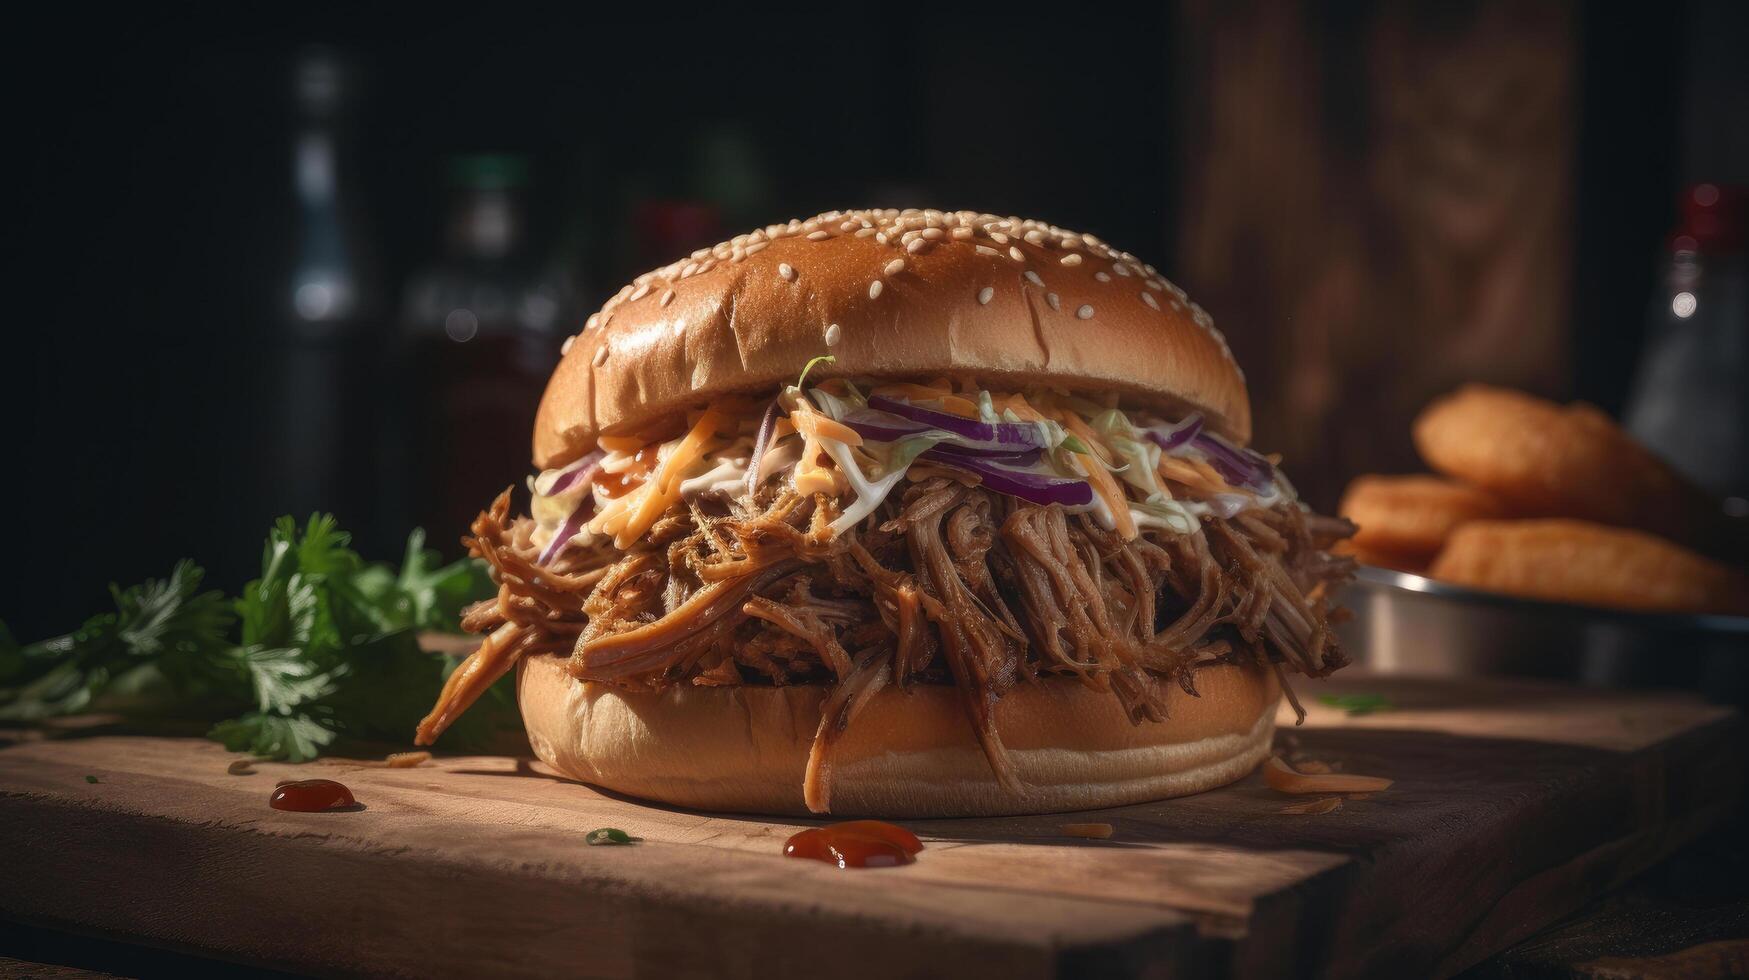 American barbecued pulled pork sandwich Illustration photo